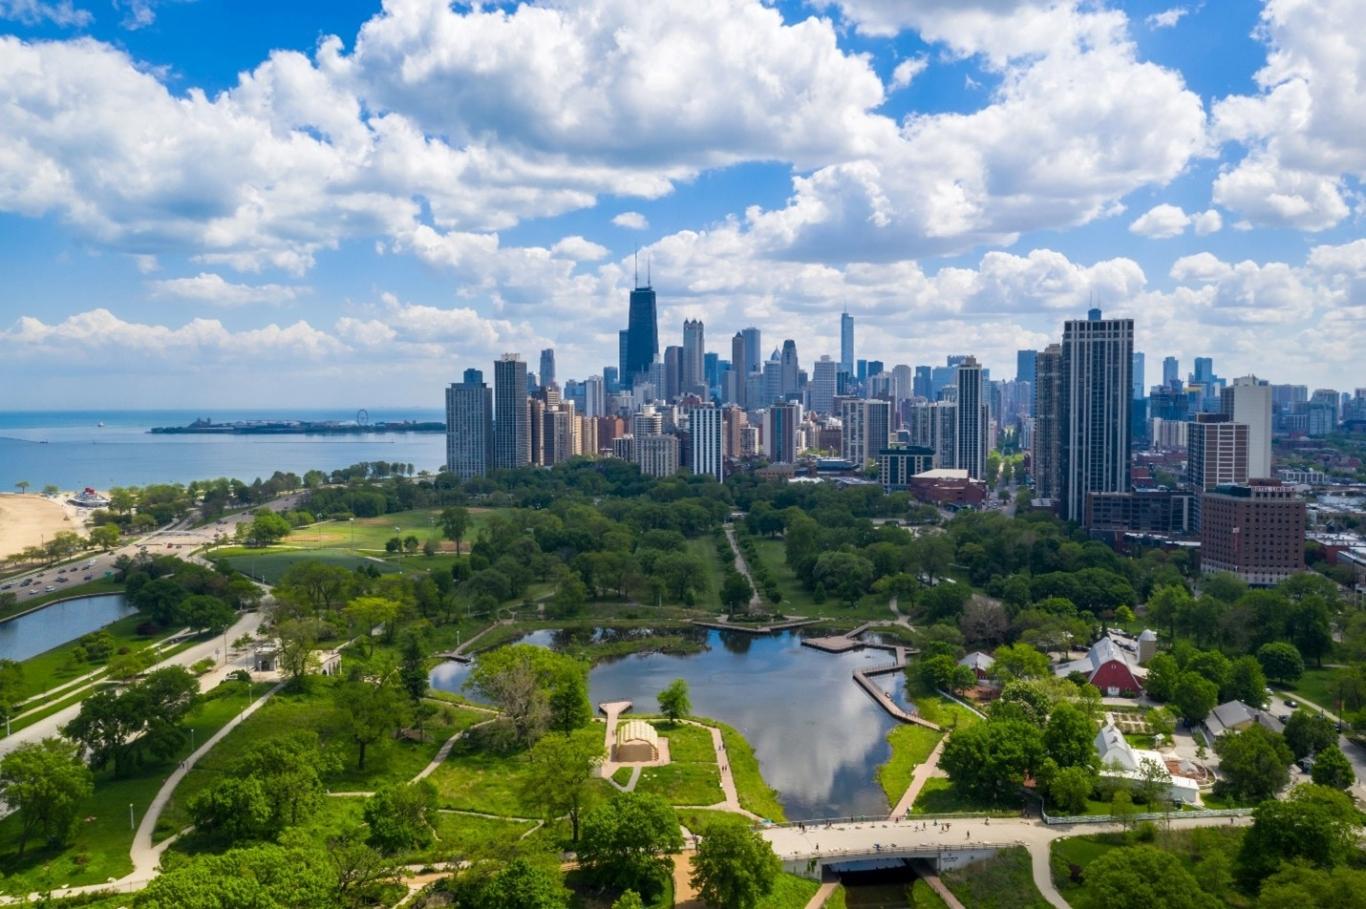 Aerial view of Lincoln Park with the Chicago skyline in the background.